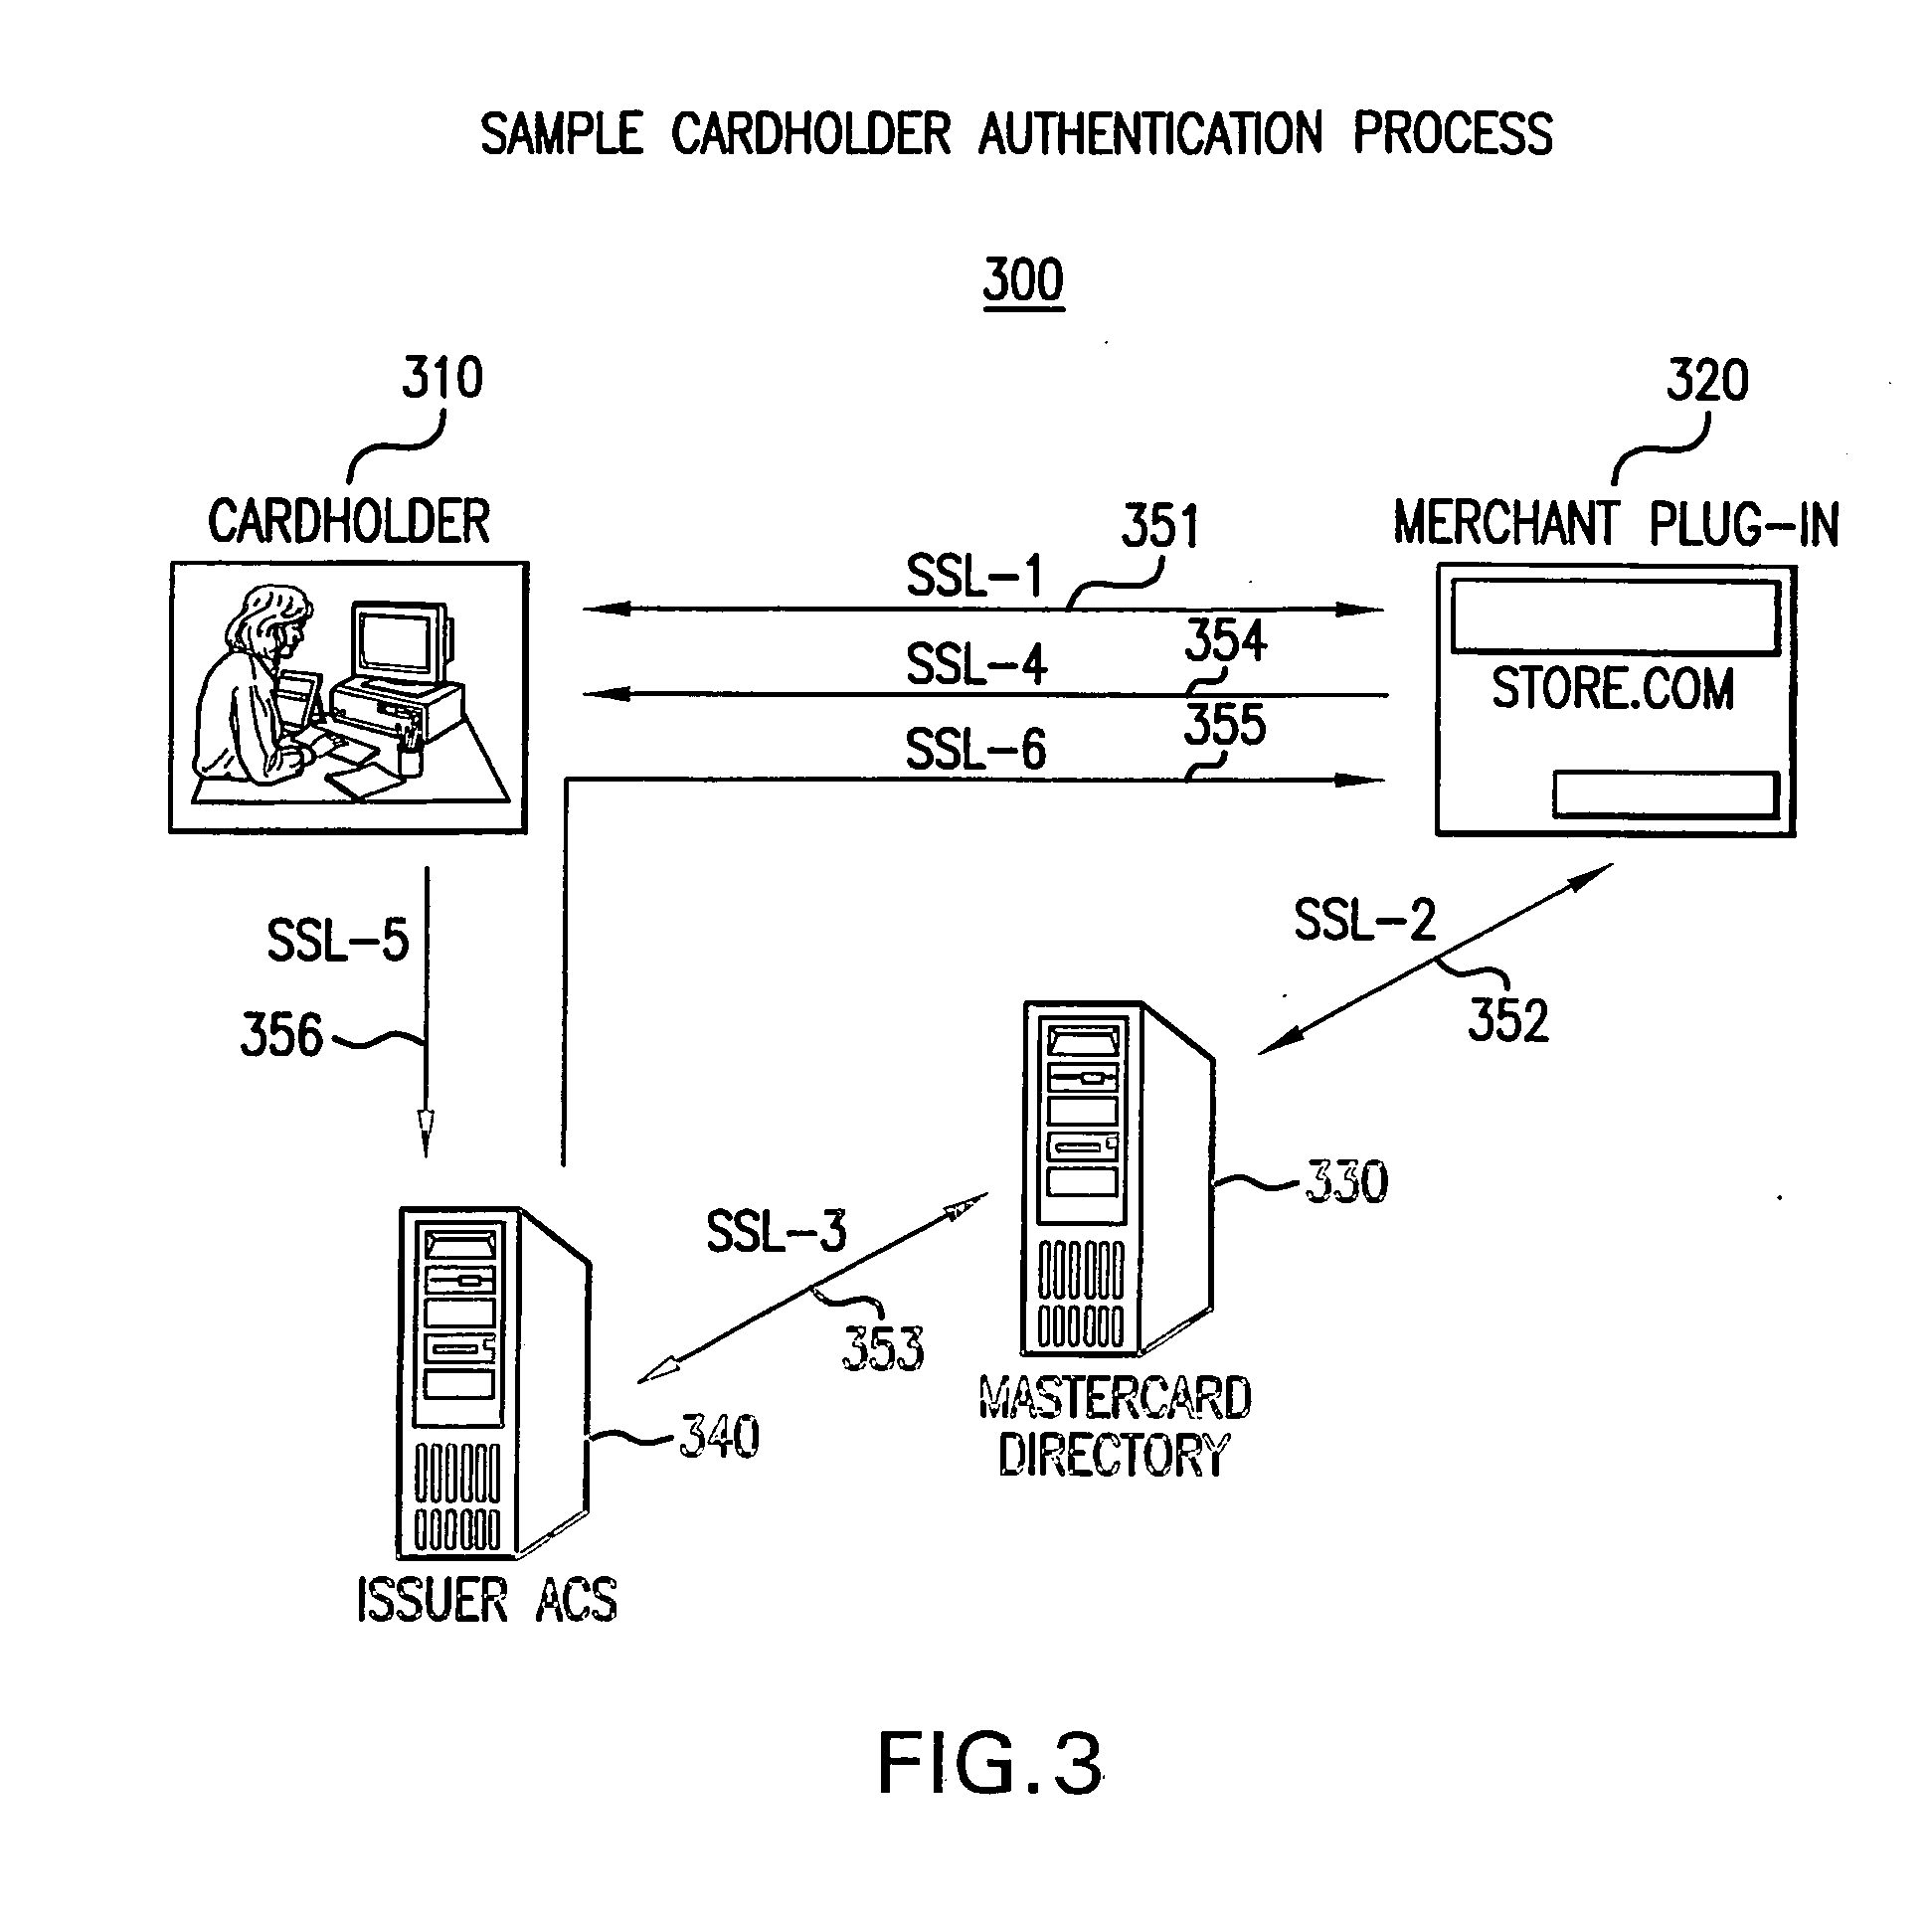 Systems and methods for conducting secure payment transactions using a formatted data structure